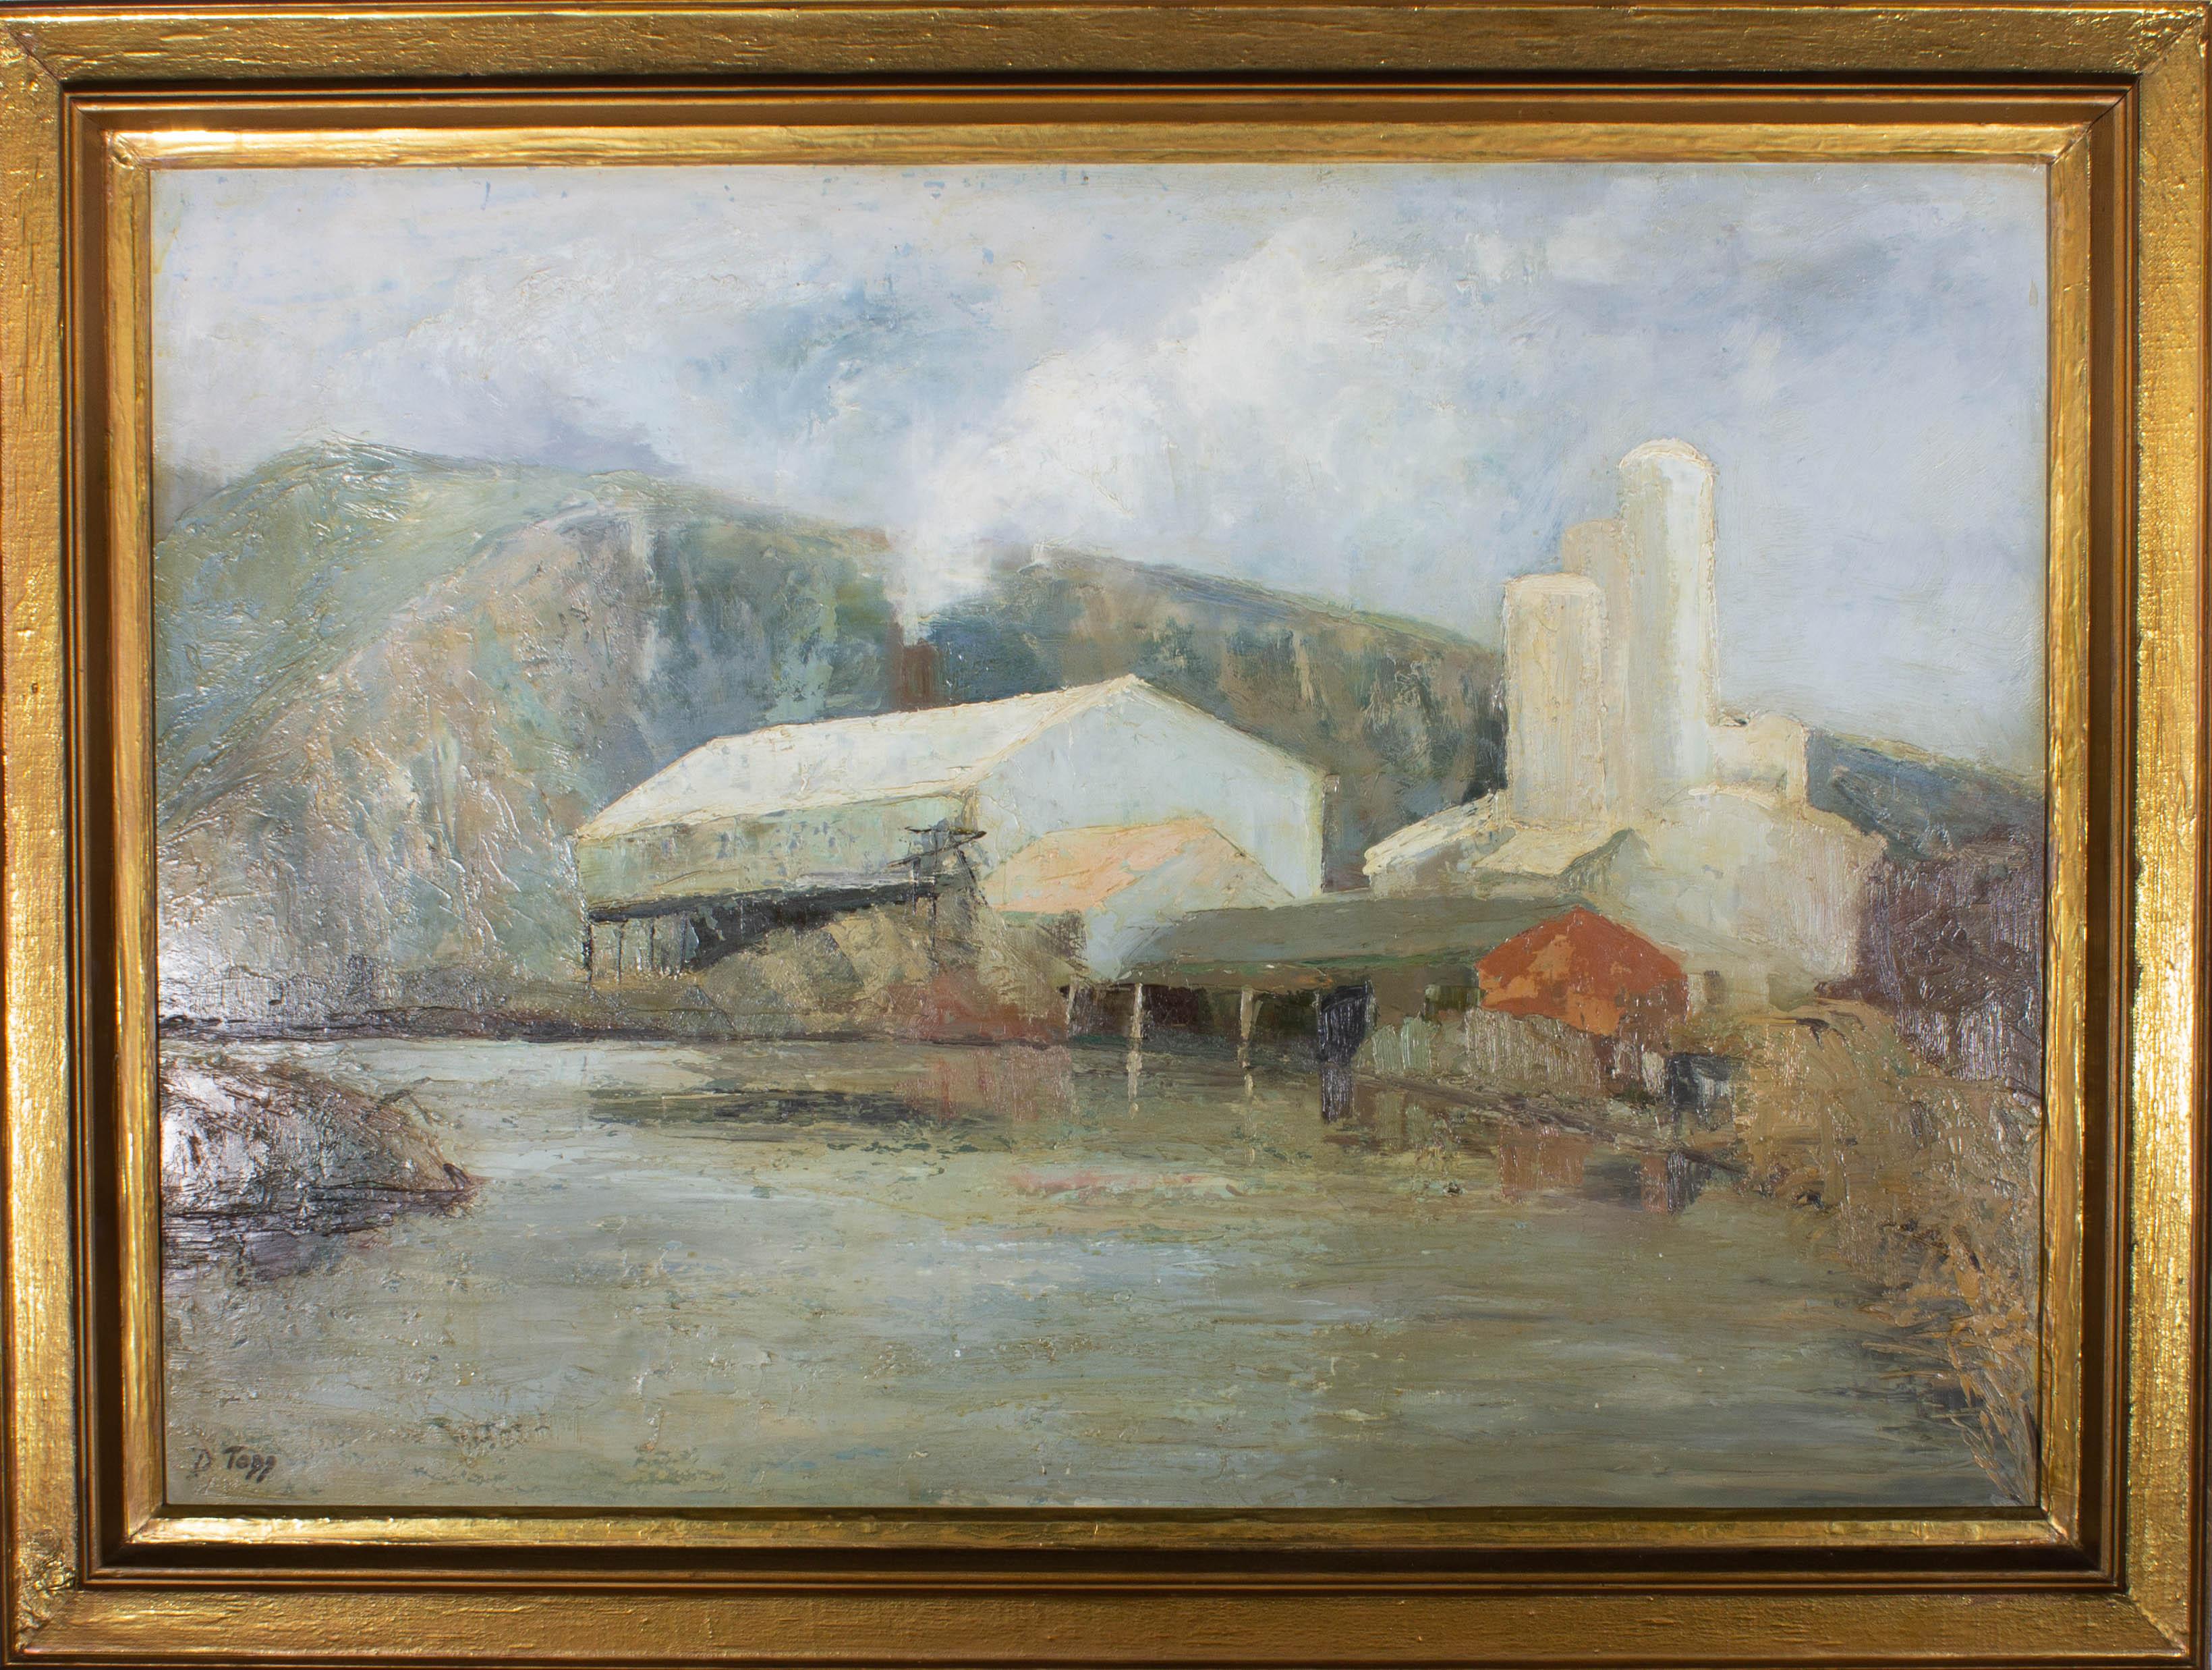 A tranquil scene depicting a mill on the river's edge with mountains in the background. Painted in an impasto technique, the artist has captured the flowing river and its surroundings in expressive brush strokes. Signed to the lower left. On board.
